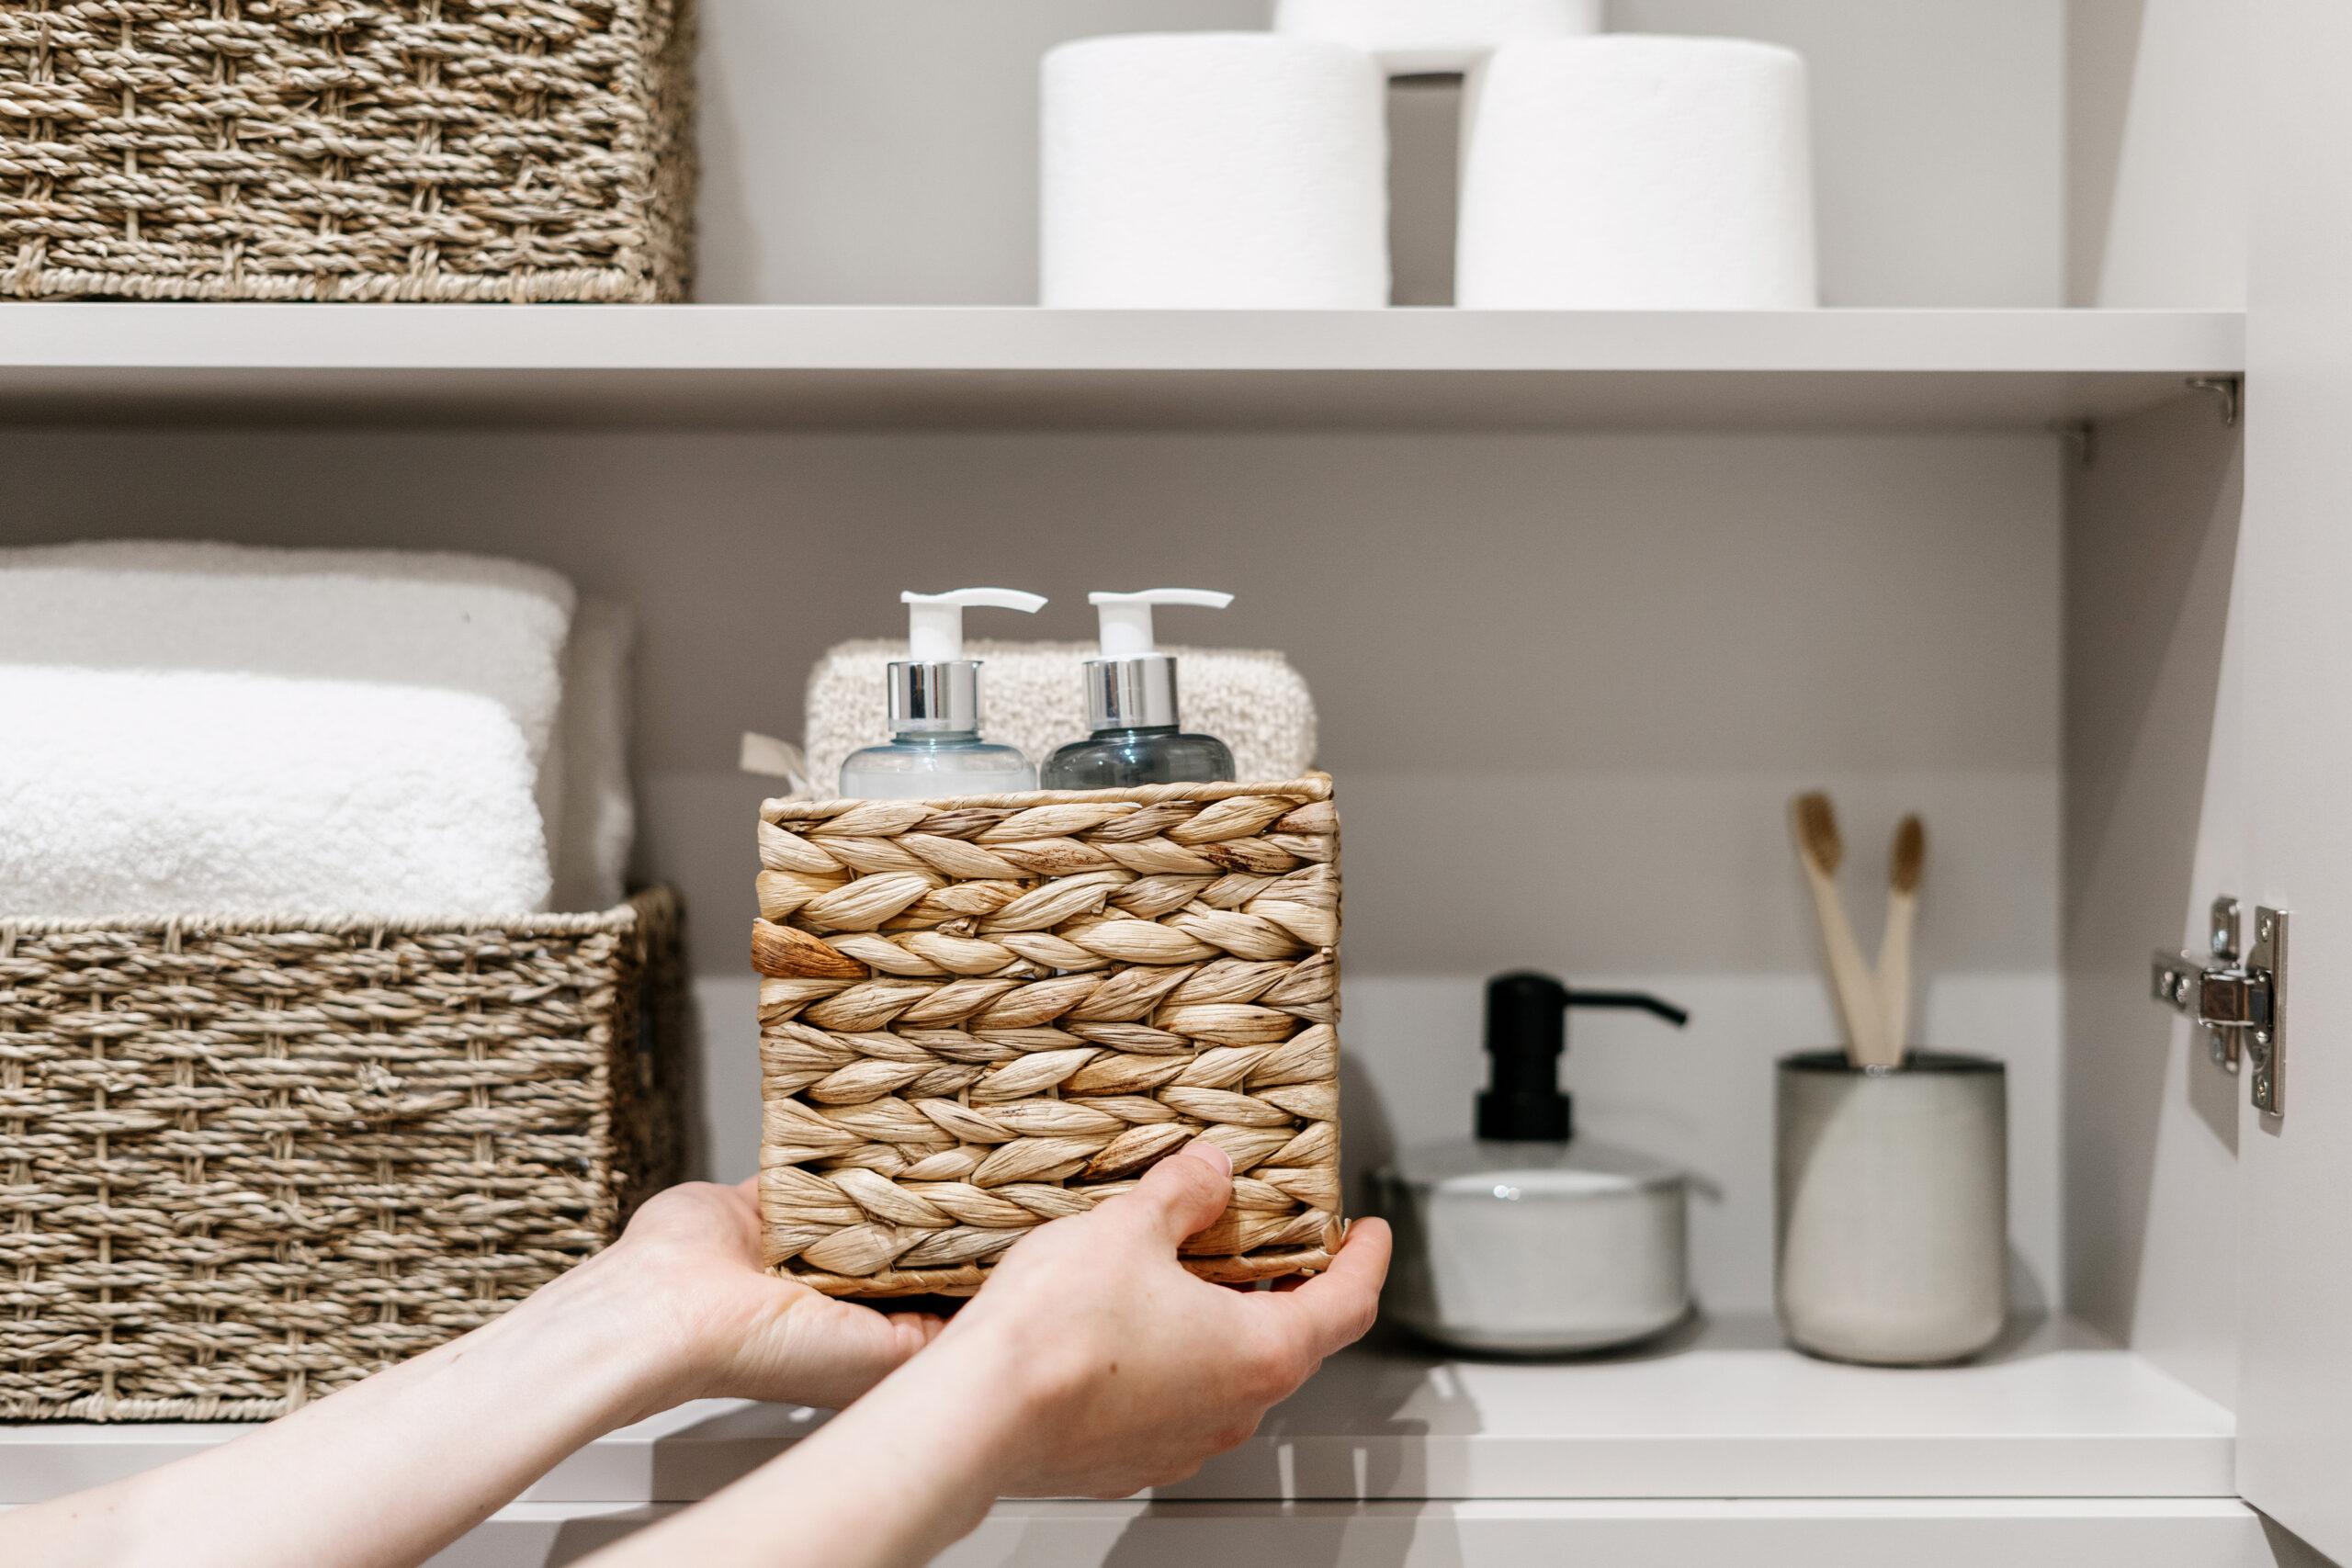 Beautify & Declutter Your Home With These Smart Storage Hacks - The  Singapore Women's Weekly